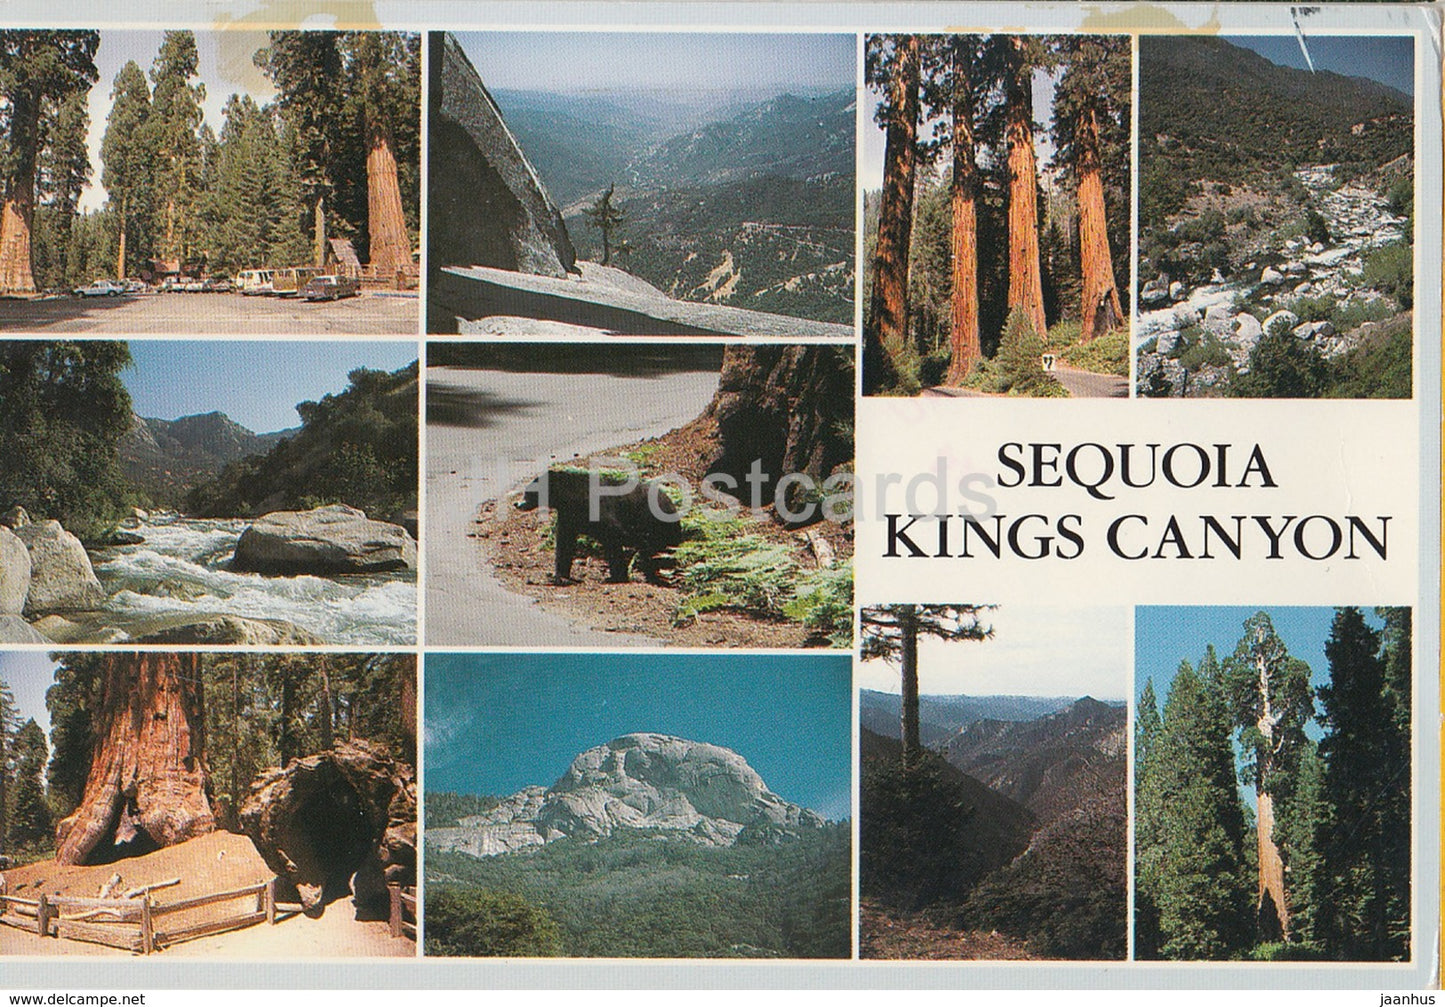 Sequoia and Kings Canyon National Parks - 1988 - USA - used - JH Postcards